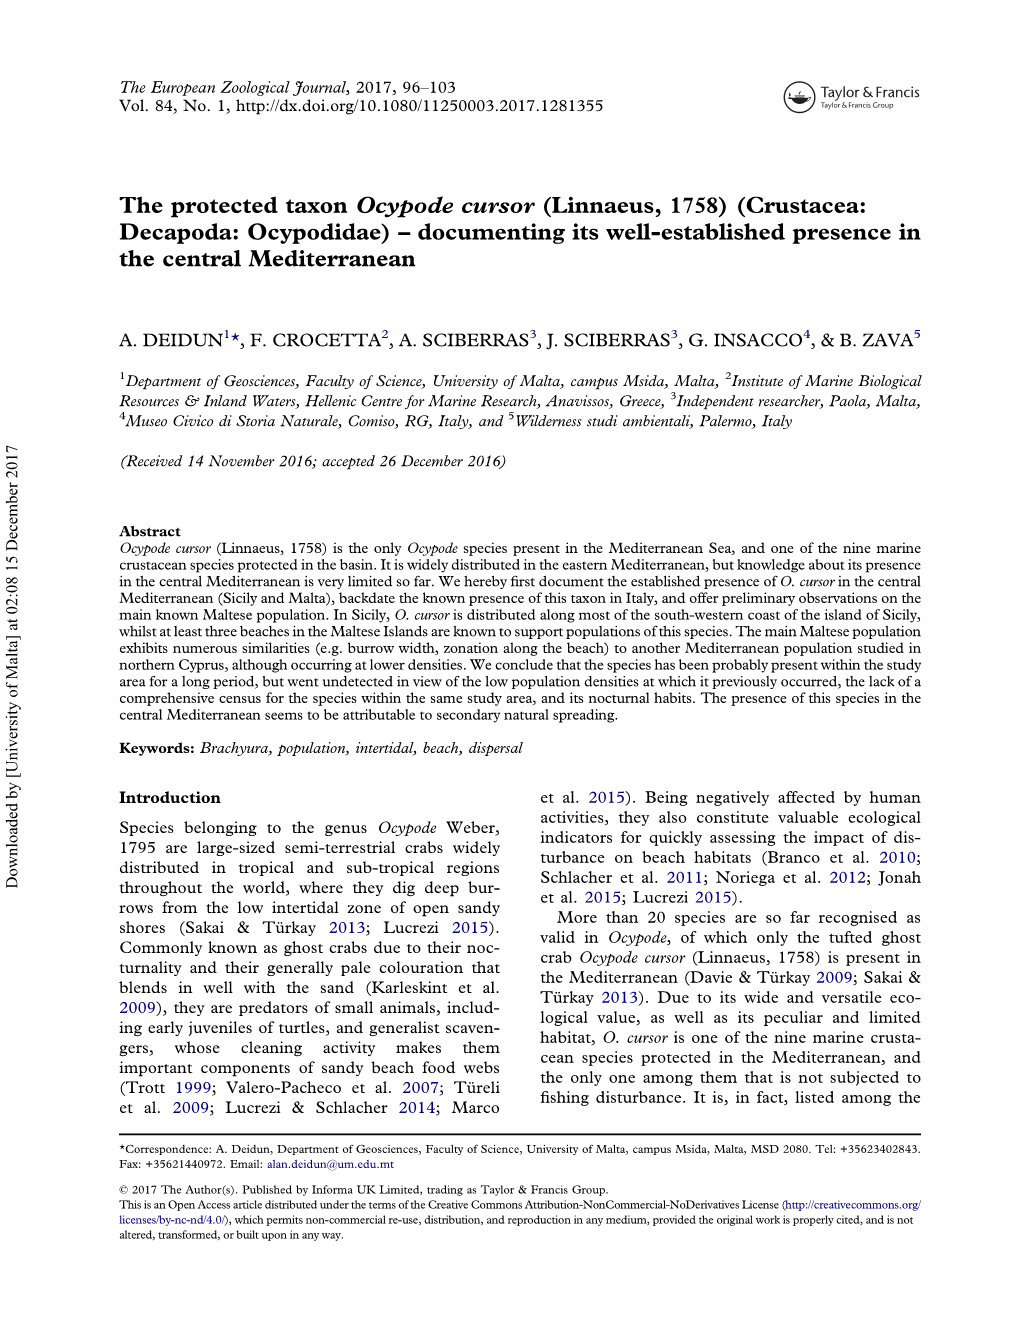 The Protected Taxon Ocypode Cursor (Linnaeus, 1758) (Crustacea: Decapoda: Ocypodidae) – Documenting Its Well-Established Presence in the Central Mediterranean